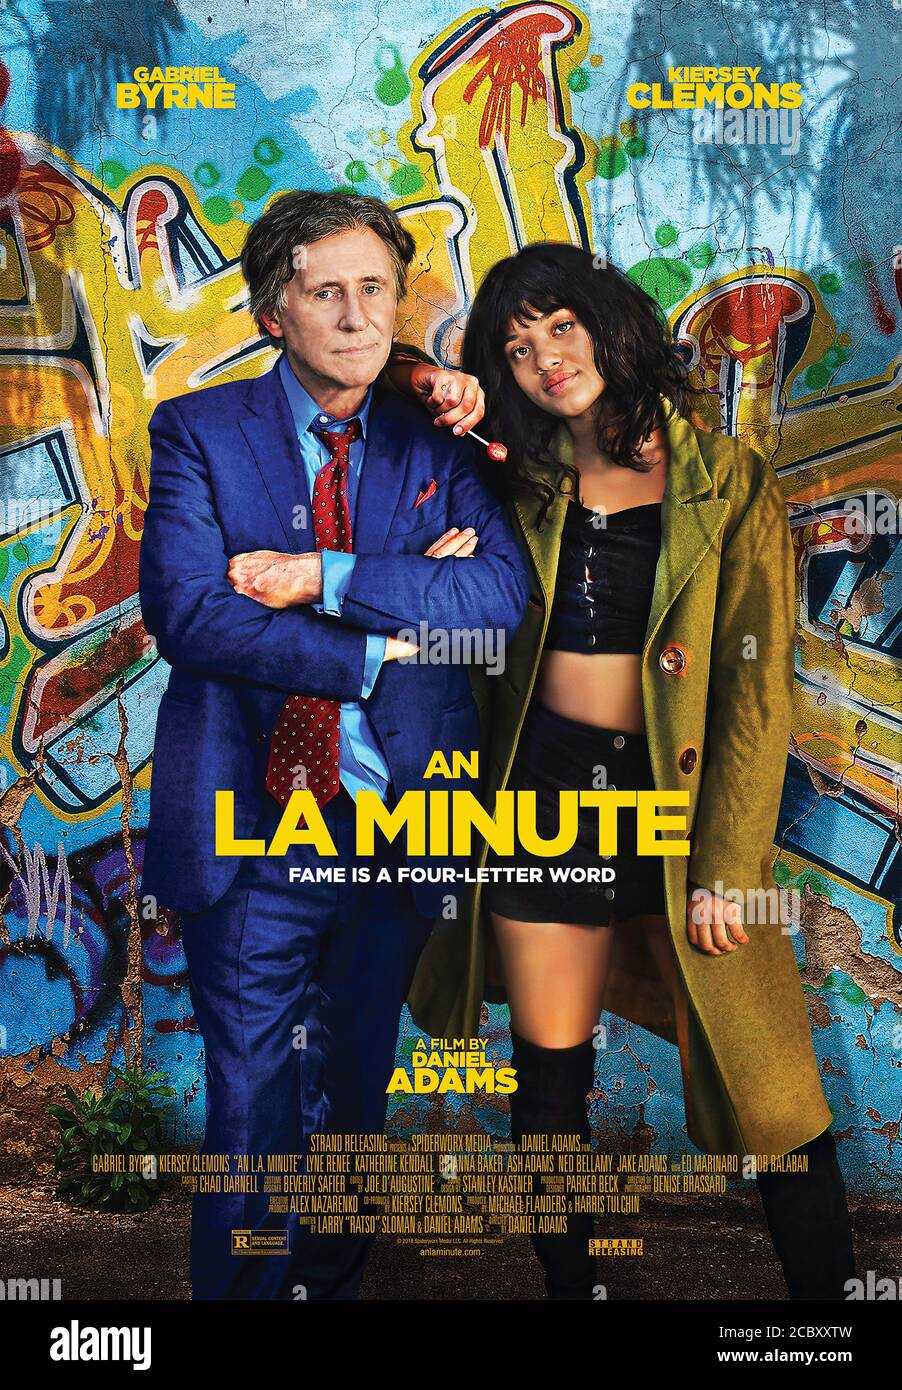 An L.A. Minute (2018) directed by Daniel Adams and starring Gabriel Byrne, Kiersey Clemons, Lyne Renée and Bob Balaban. Satirical comedy about celebrity culture and Tinseltown about a sellout best selling author meeting a performance artist with integrity. Stock Photo